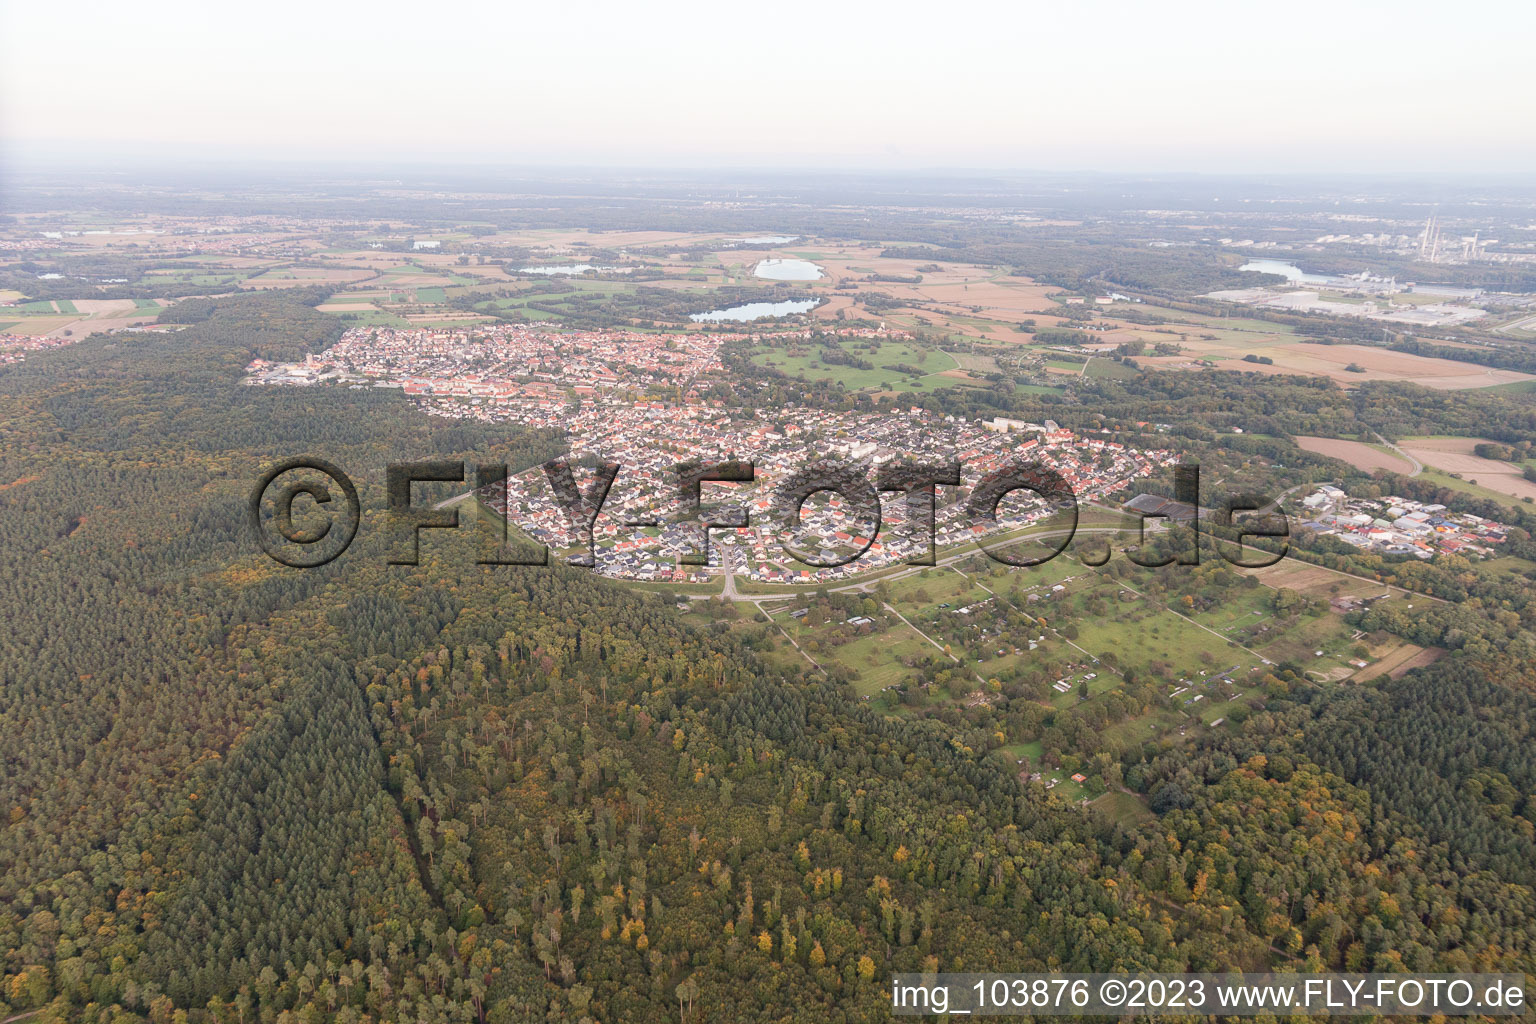 Jockgrim in the state Rhineland-Palatinate, Germany from a drone